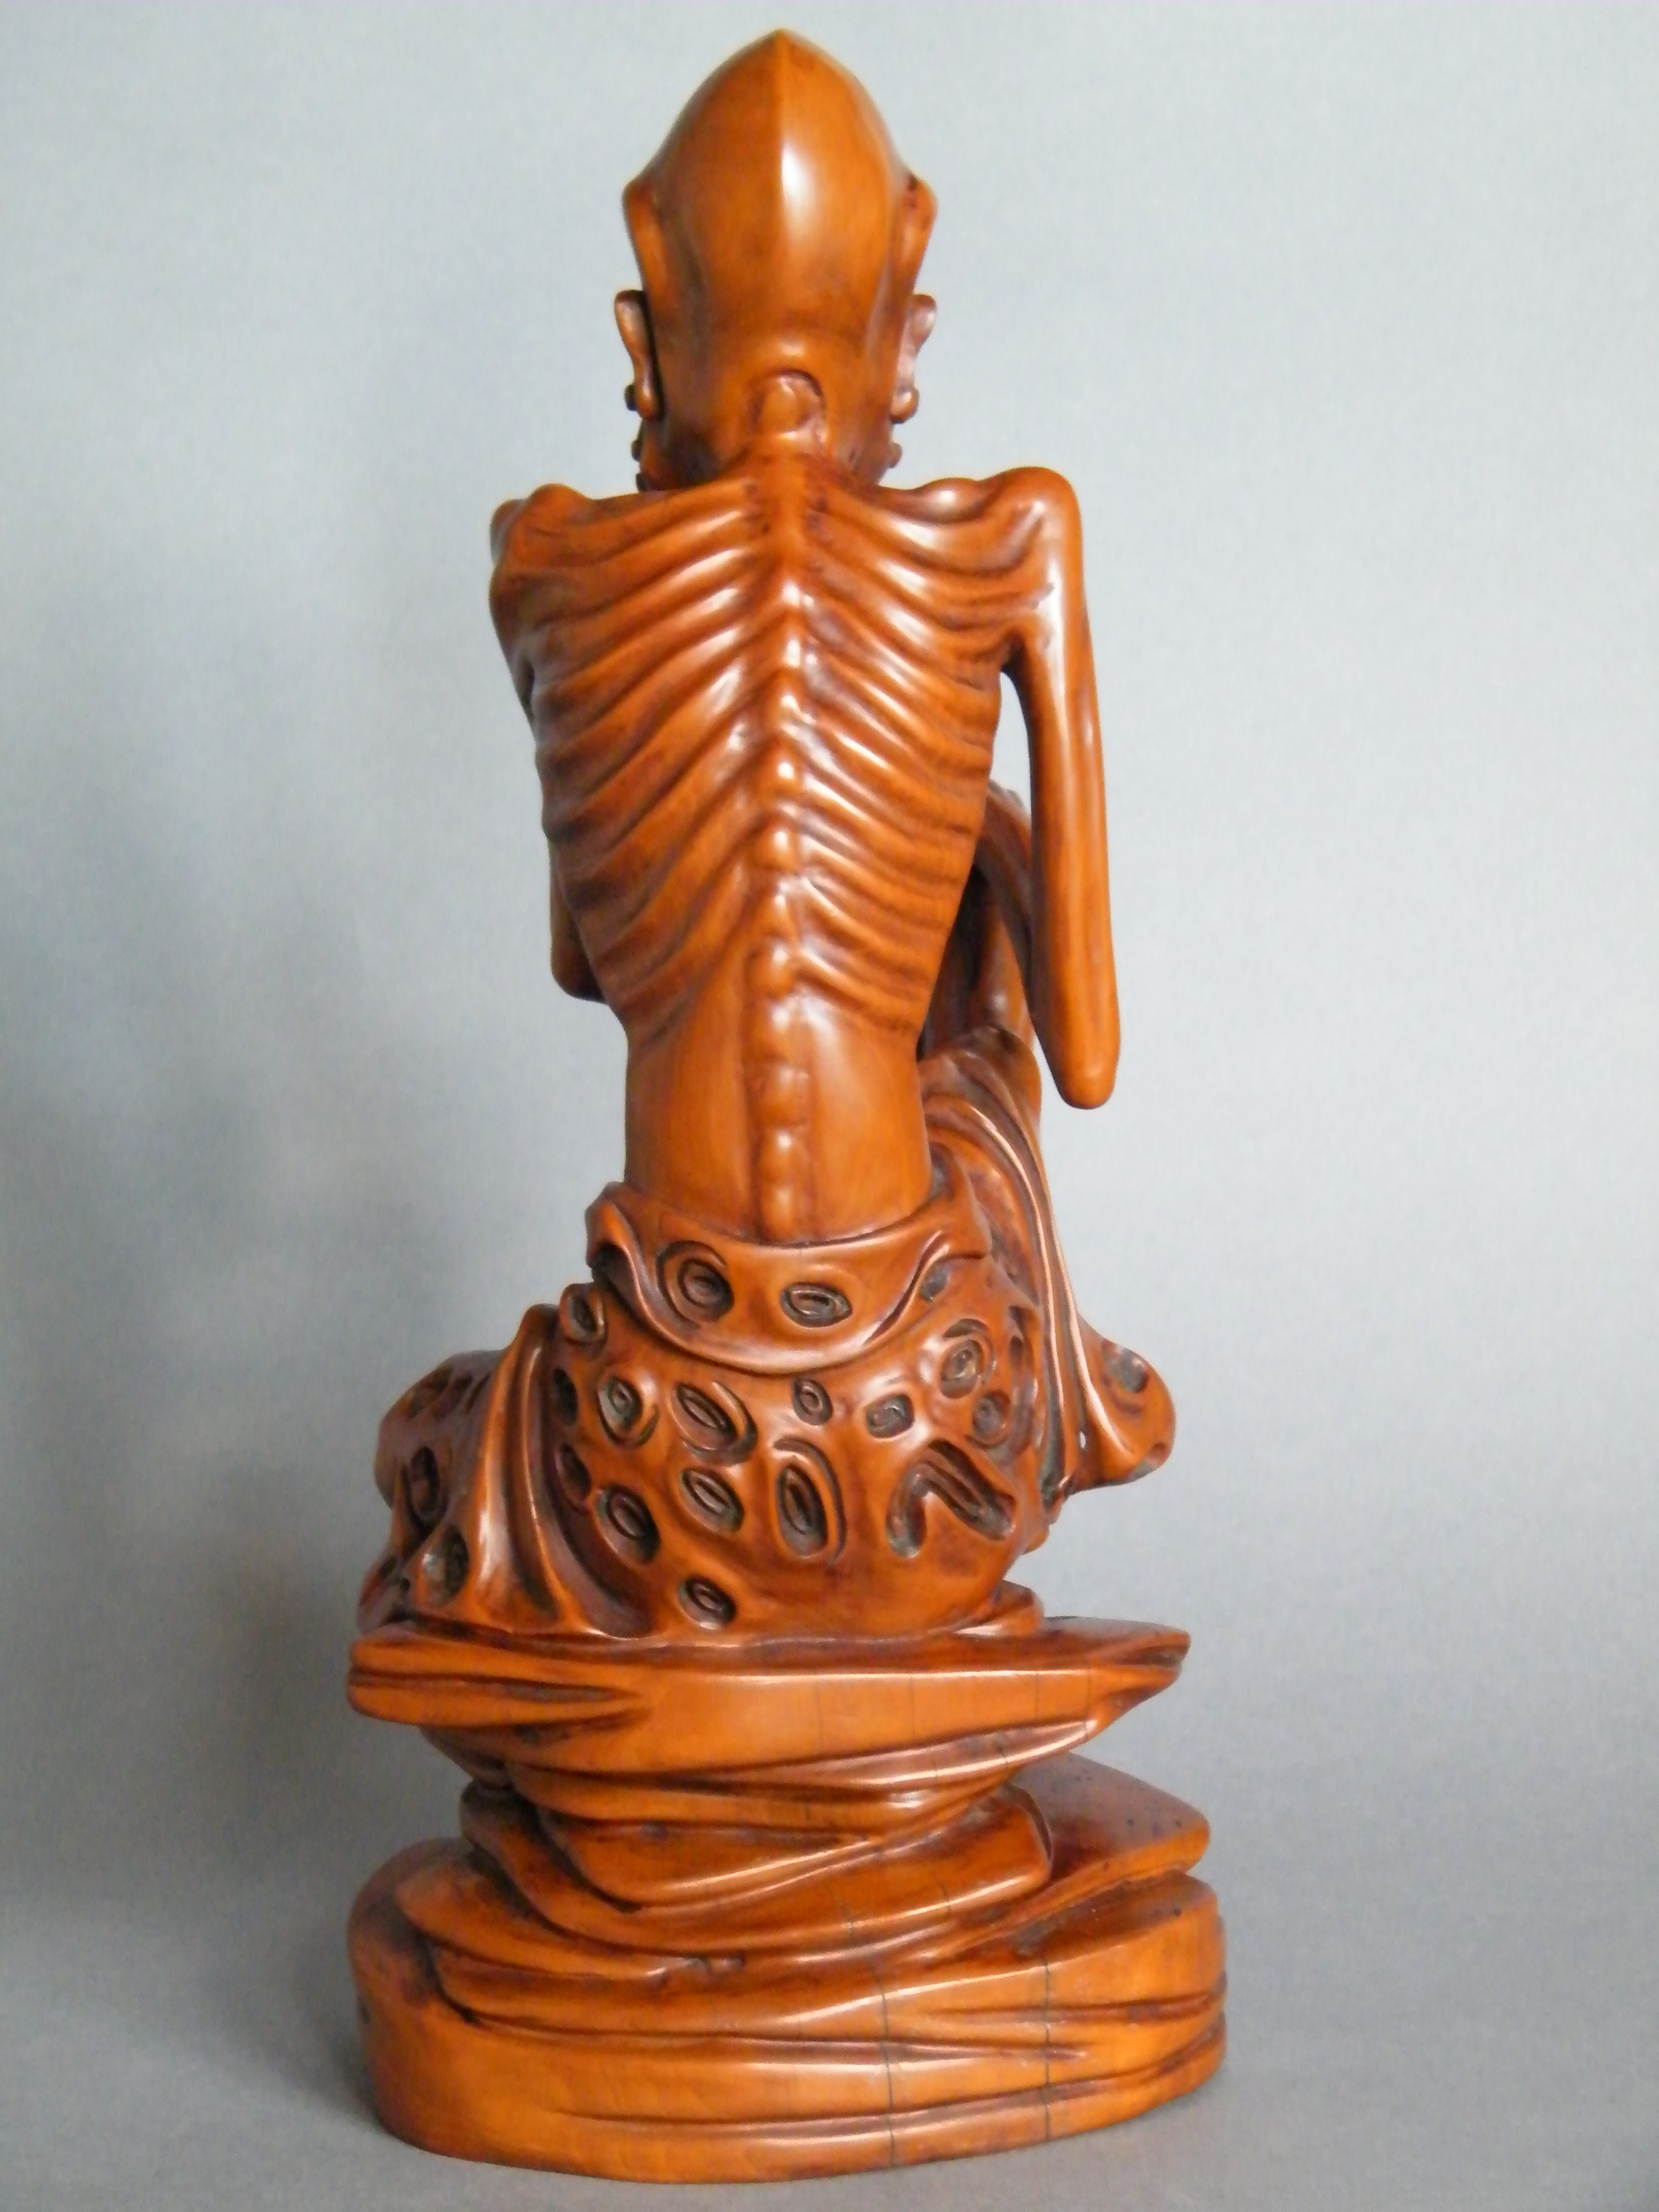 #0009   18th Century Chinese Boxwood Figure 'Damo'  -  Sold to China - April 2012 售至中国 - 2012 年4月